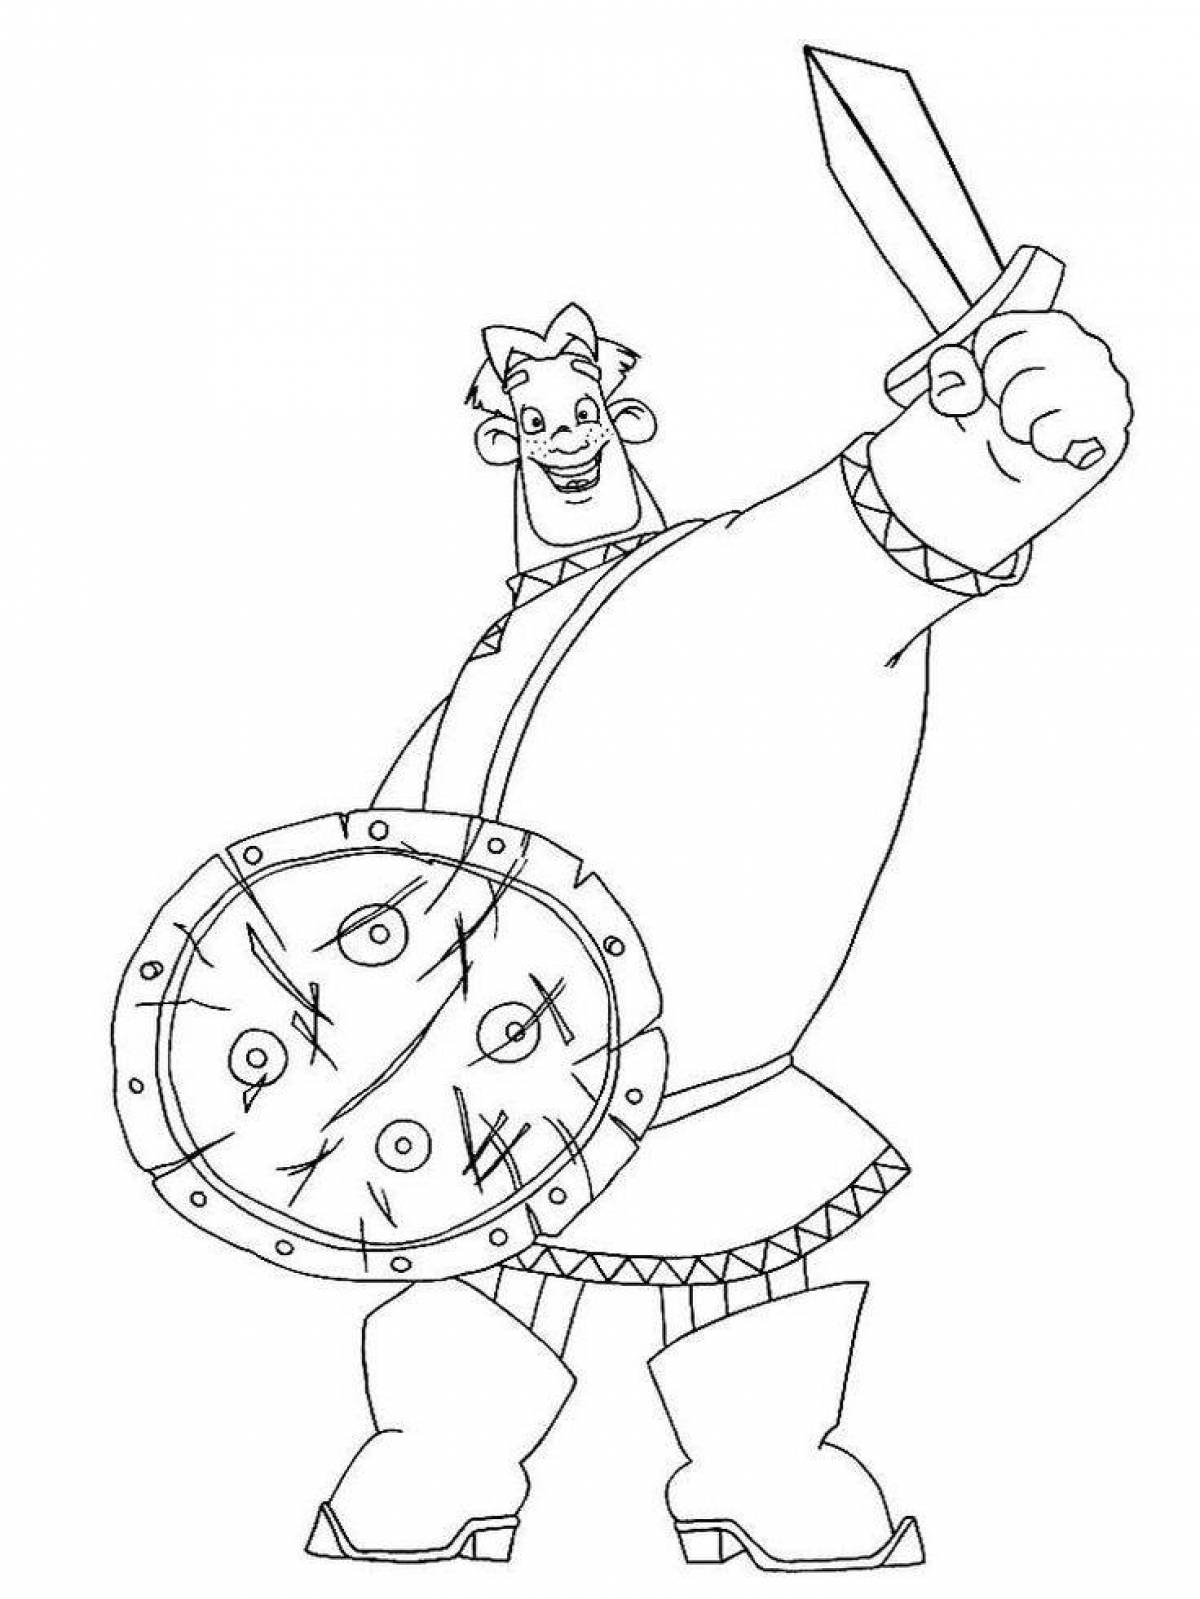 Adorable coloring page 3 heroes